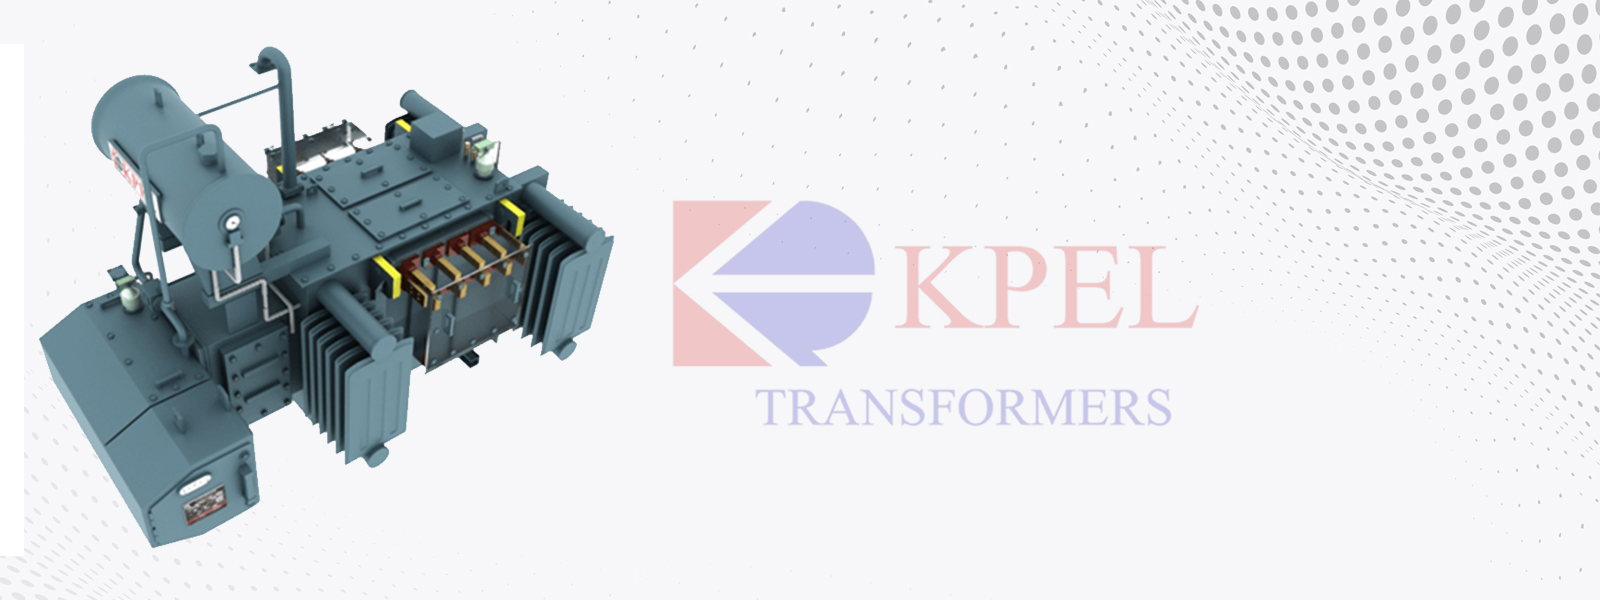 Oil Filled Transformers Manufacturers and Suppliers